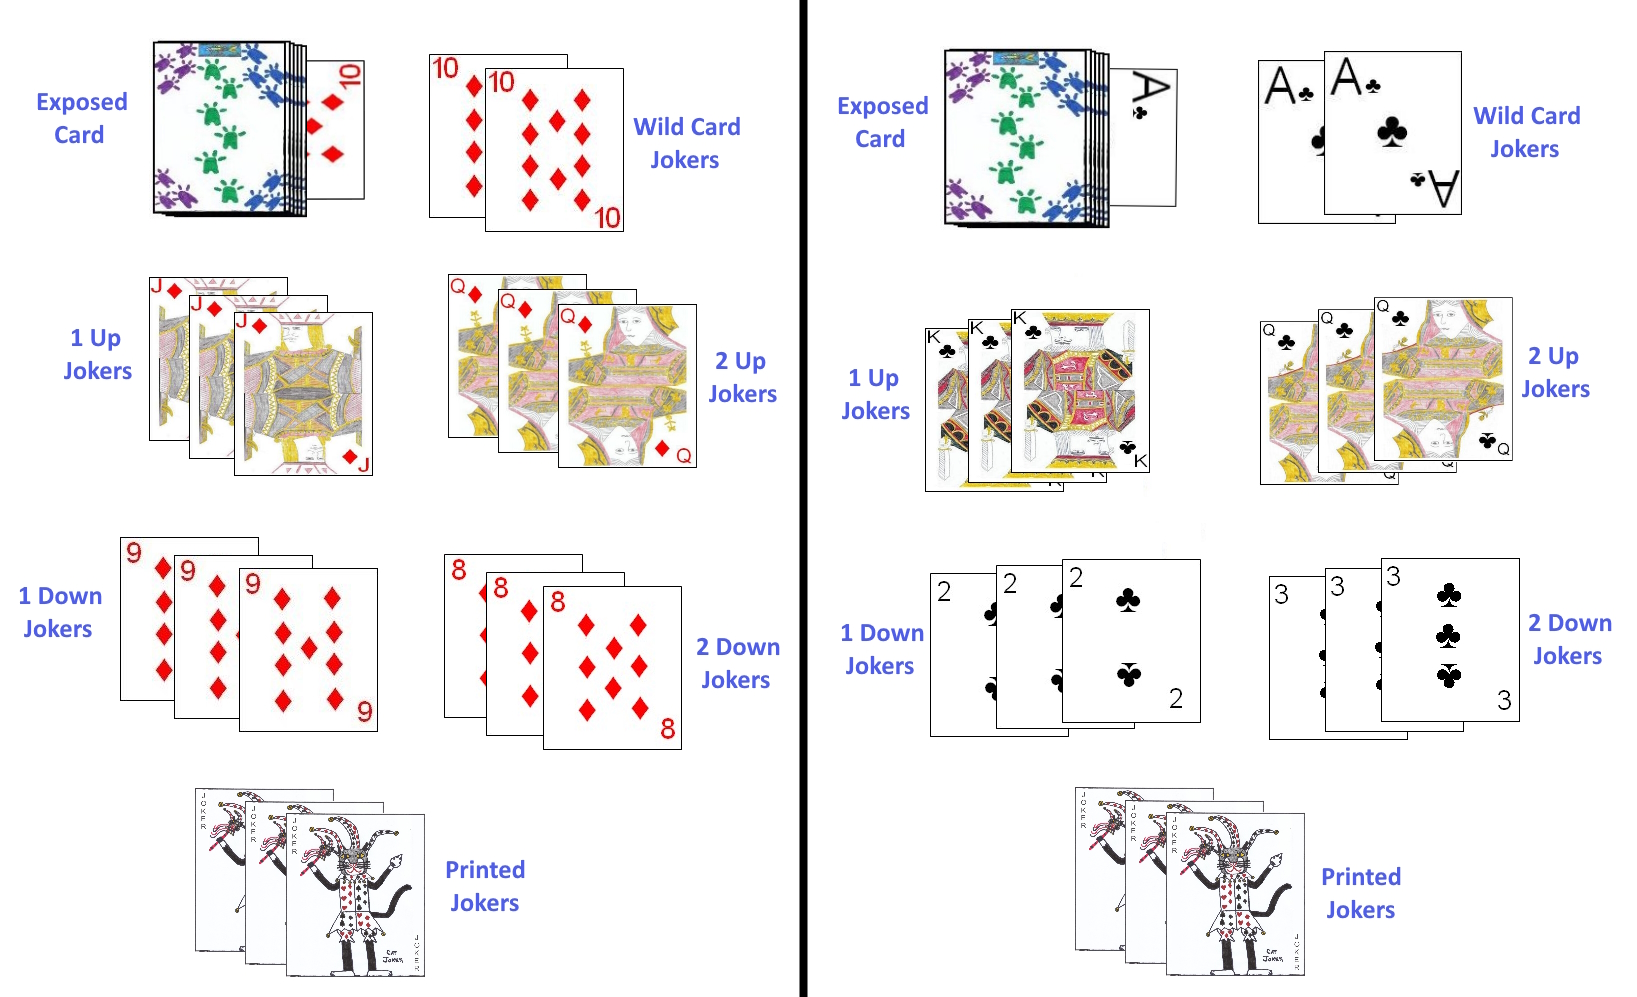 Wild card examples in 27 Card Indian Rummy